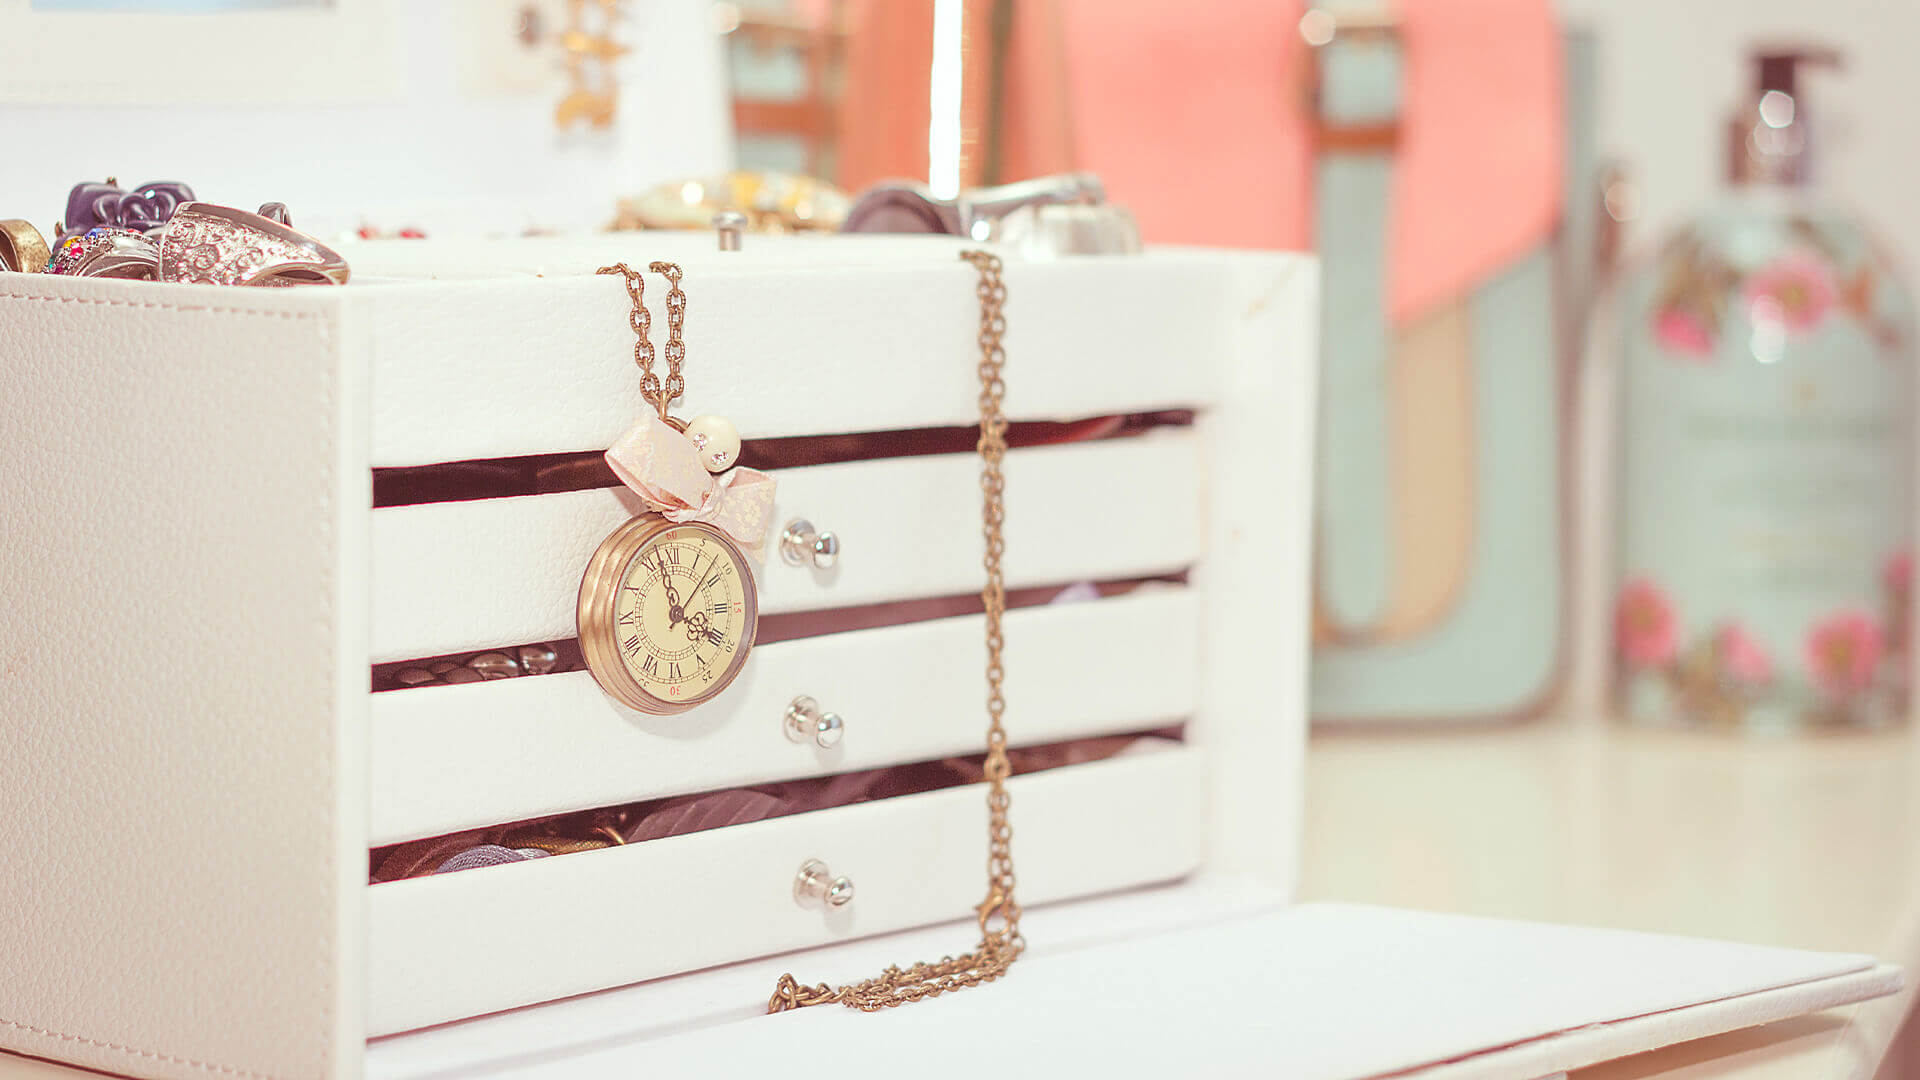 how to organize jewelry in a drawer